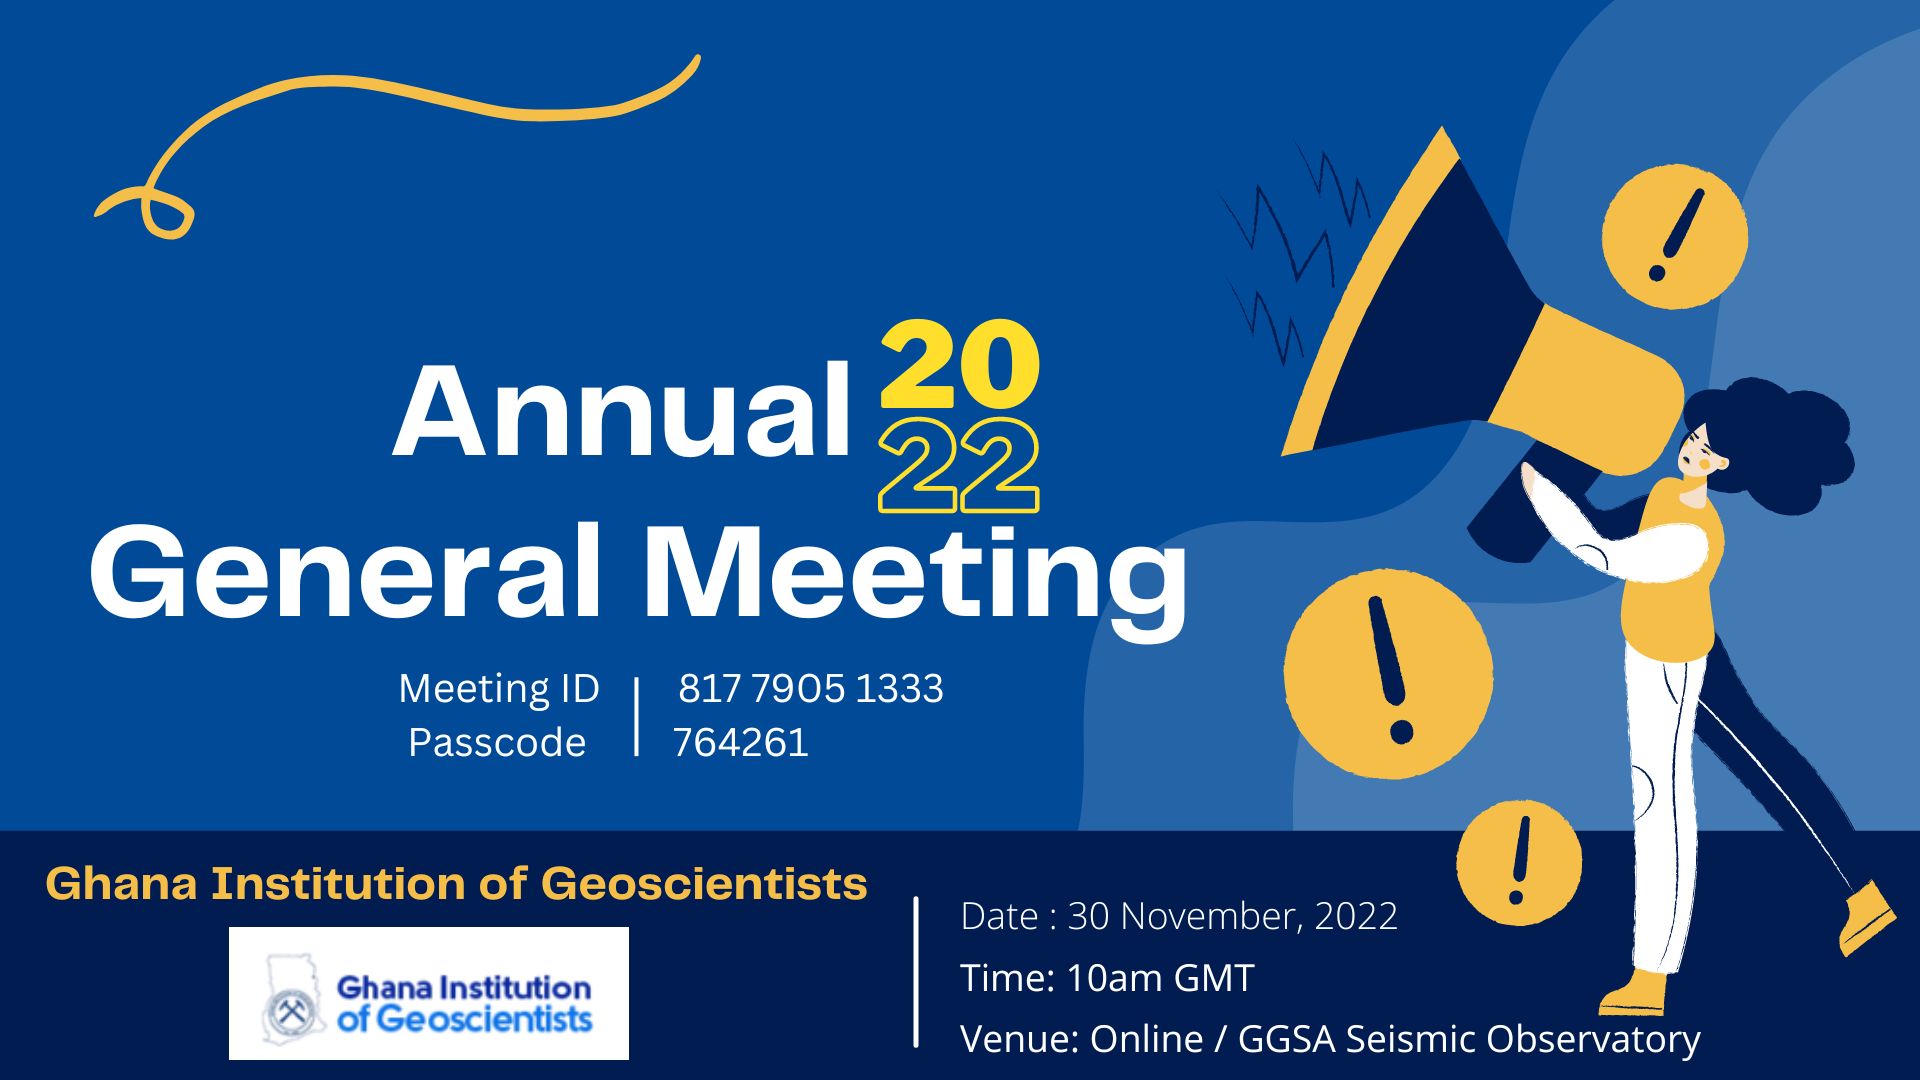 22′ ANNUAL GENERAL MEETING OF THE GHANA INSTITUTION OF GEOSCIENTISTS